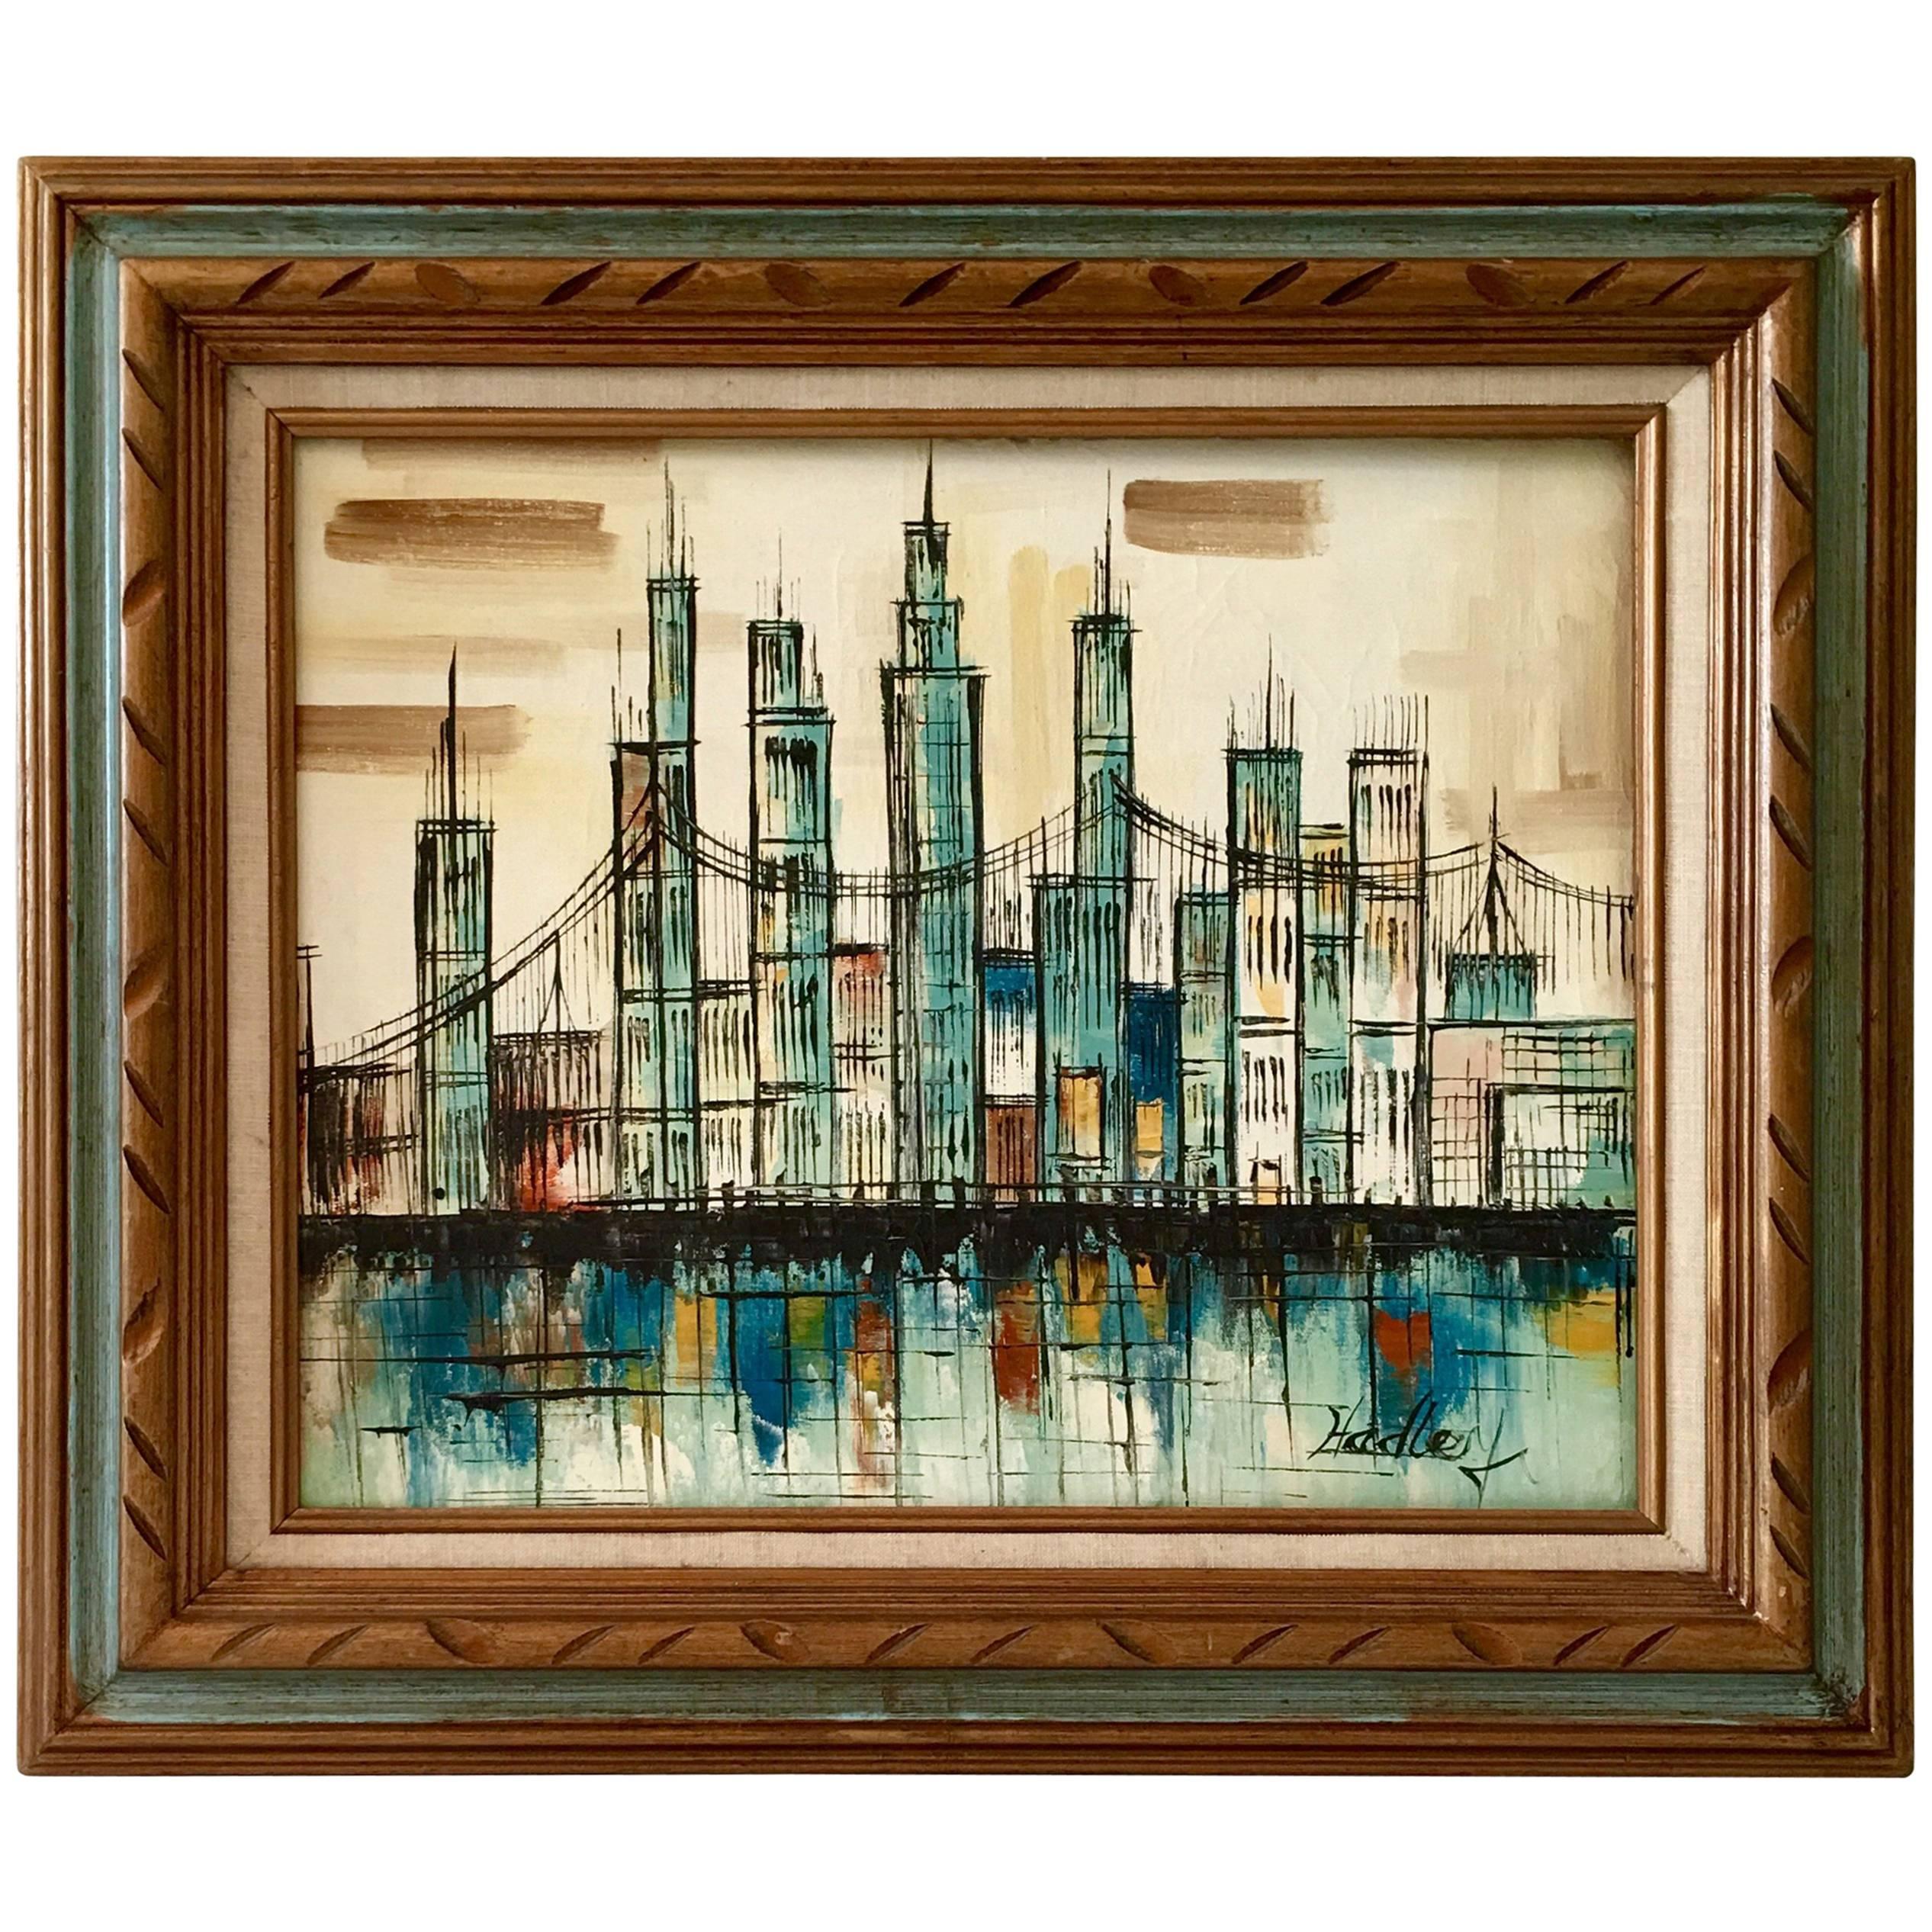 Mid-Century Modern Original Oil On Canvas "Cityscape" Painting By, Hadley For Sale